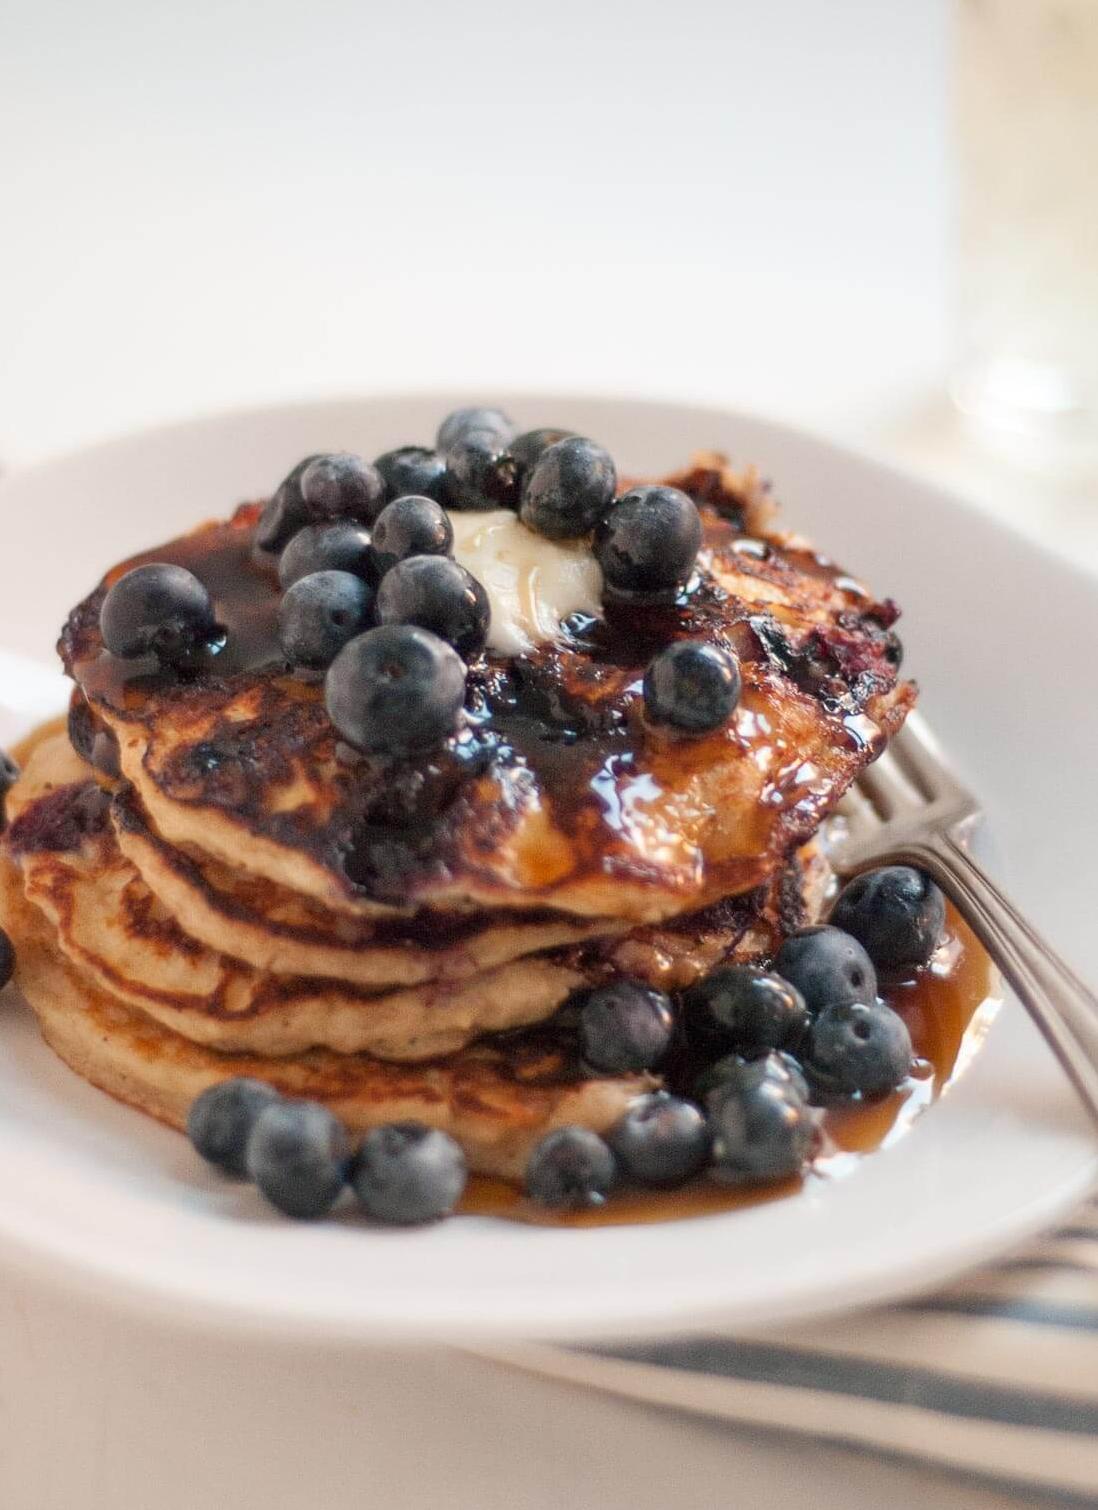  These pancakes are so light and airy, they practically float off the plate.